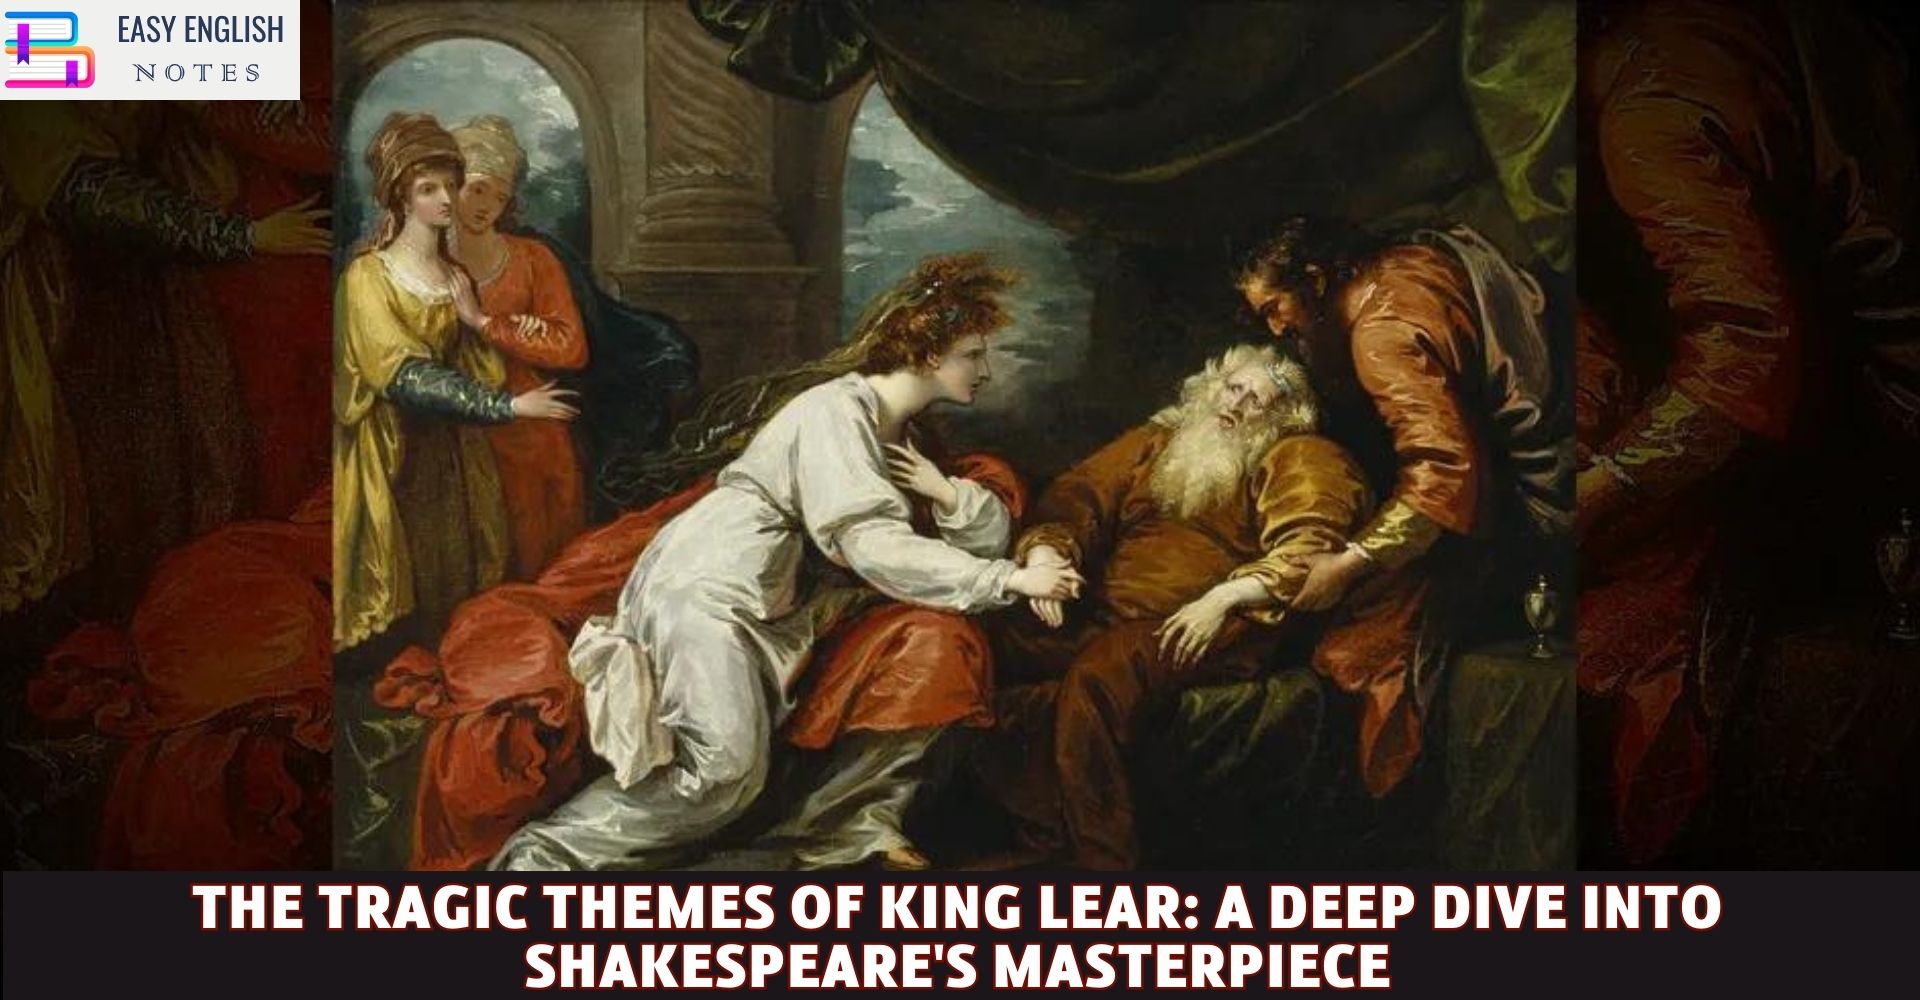 The Tragic Themes of King Lear: A Deep Dive into Shakespeare's Masterpiece